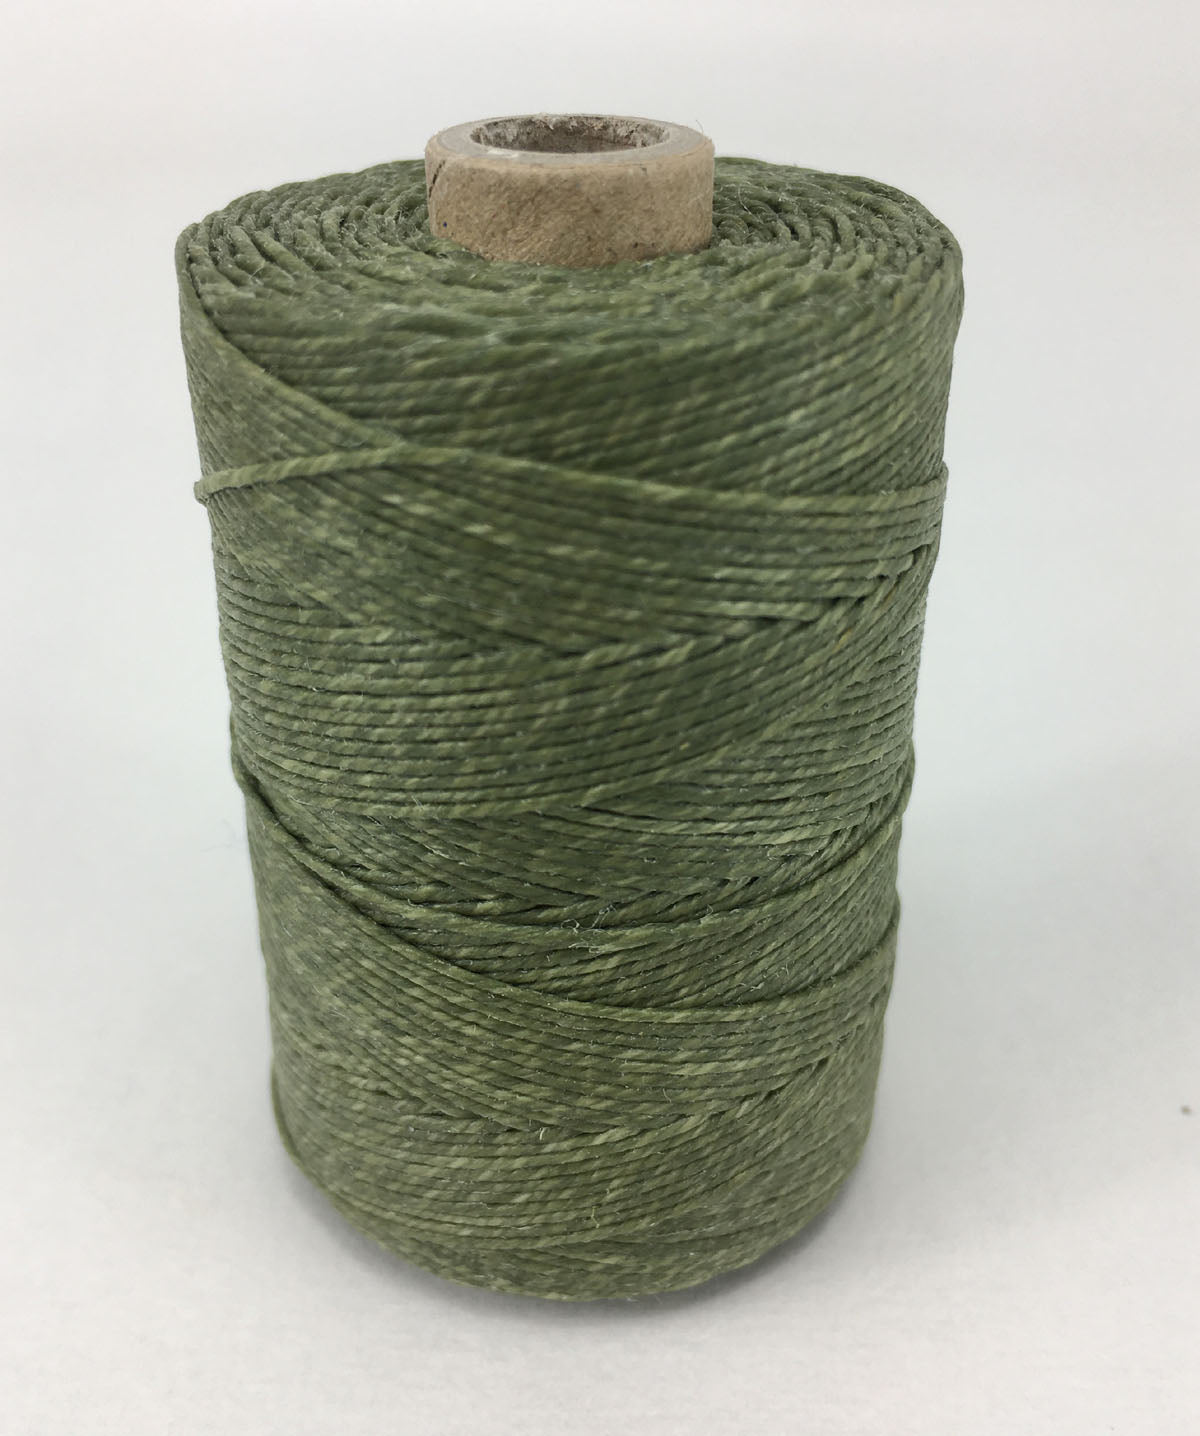 Olive Green- Per spool 50g- 100% Pure Linen Thread- Waxed- 18/3 No.18 Cord 3- Approx 0.55mm thick